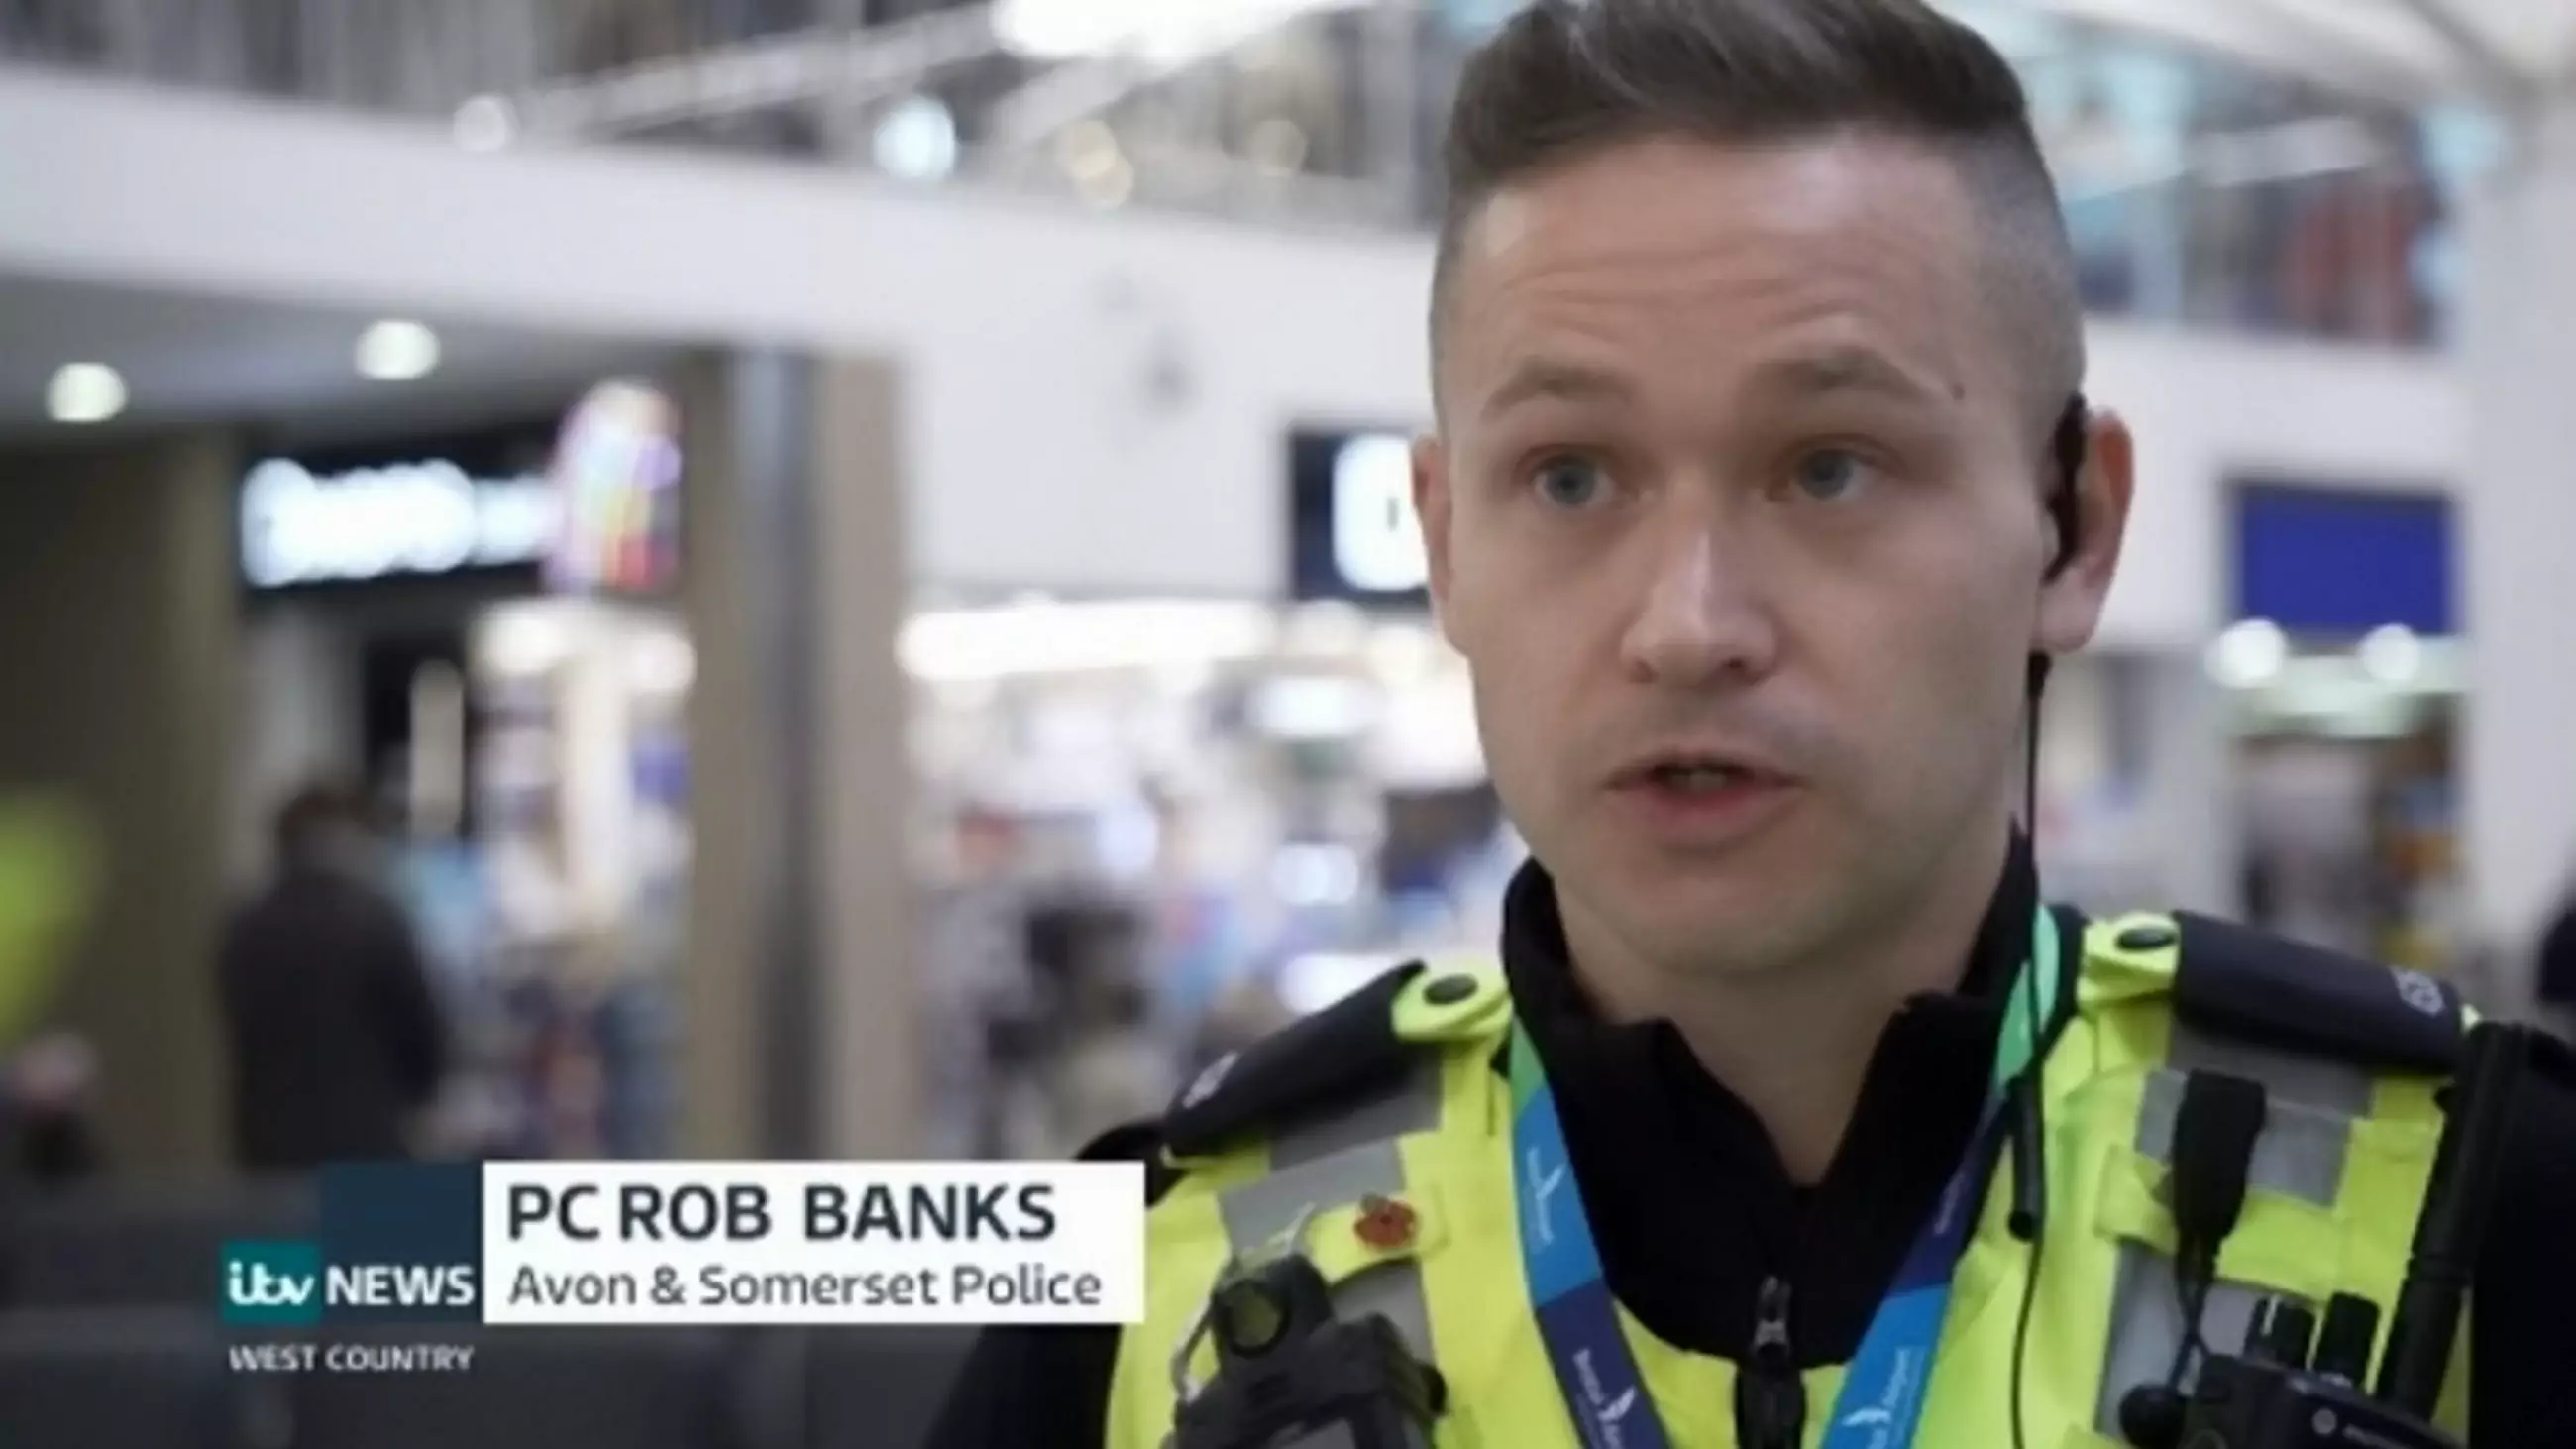 Policeman Called PC Rob Banks Goes Viral After TV Interview